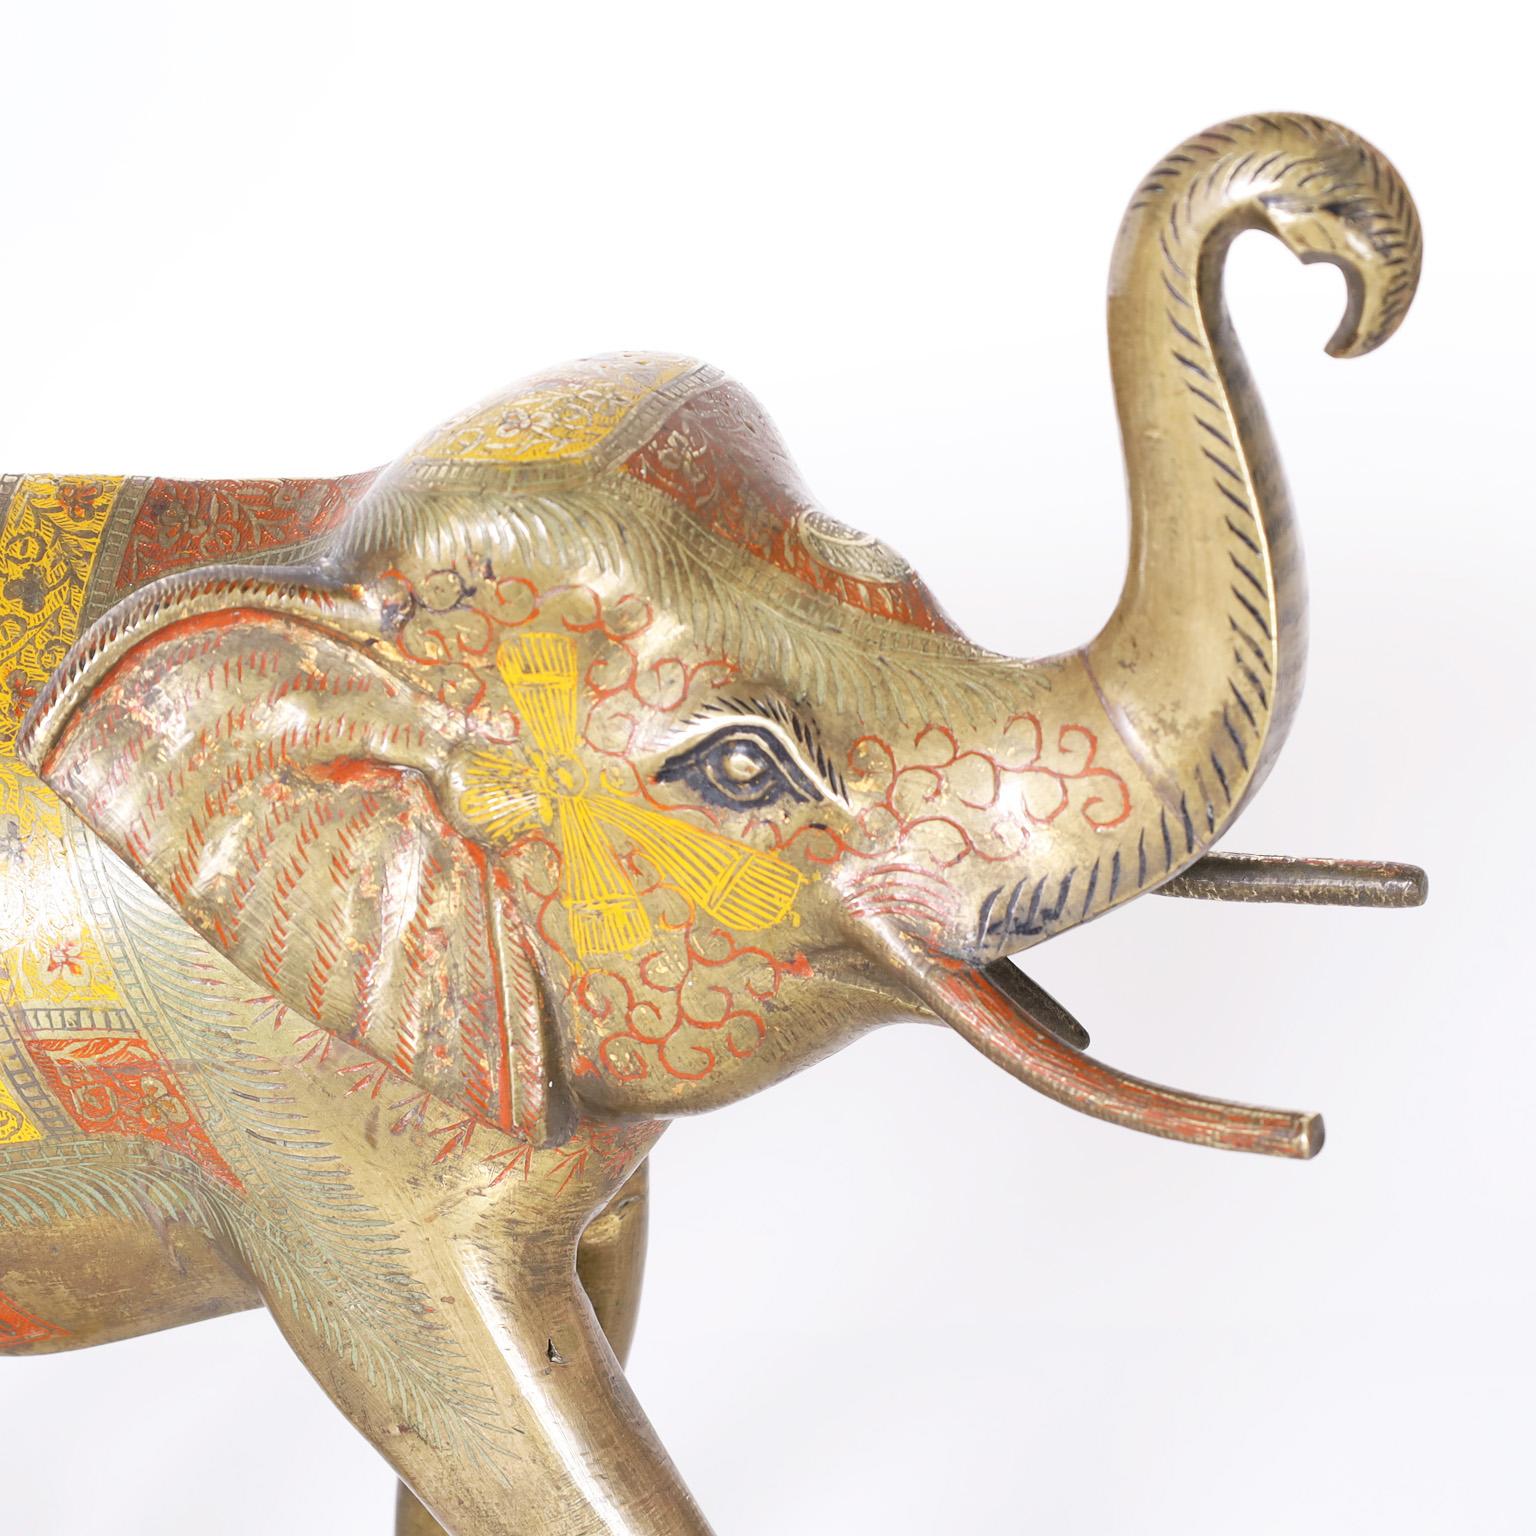 Anglo Indian cast brass elephant captured in mid strut and decorated with red and yellow enamel.